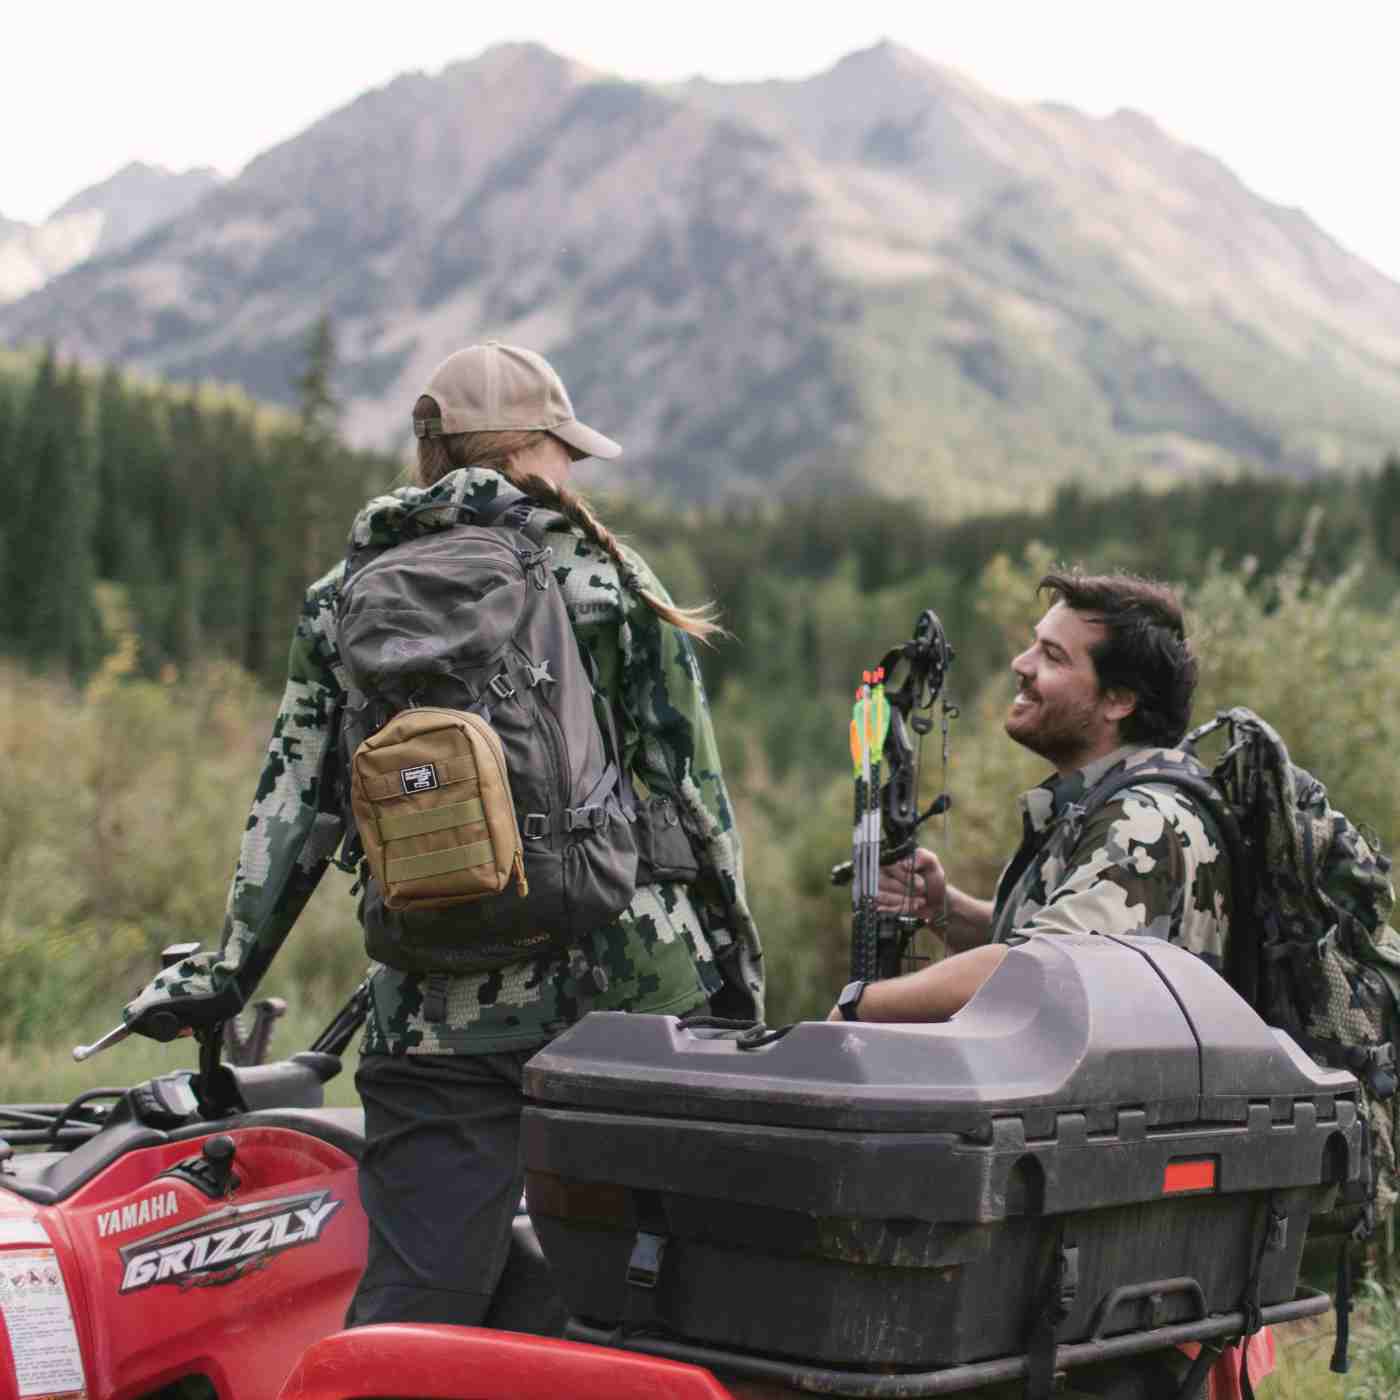 MOLLE Bag Trauma Kit 2.0 - Khaki kit attached to backpack of woman in camo on ATV next to man with bow and arrow